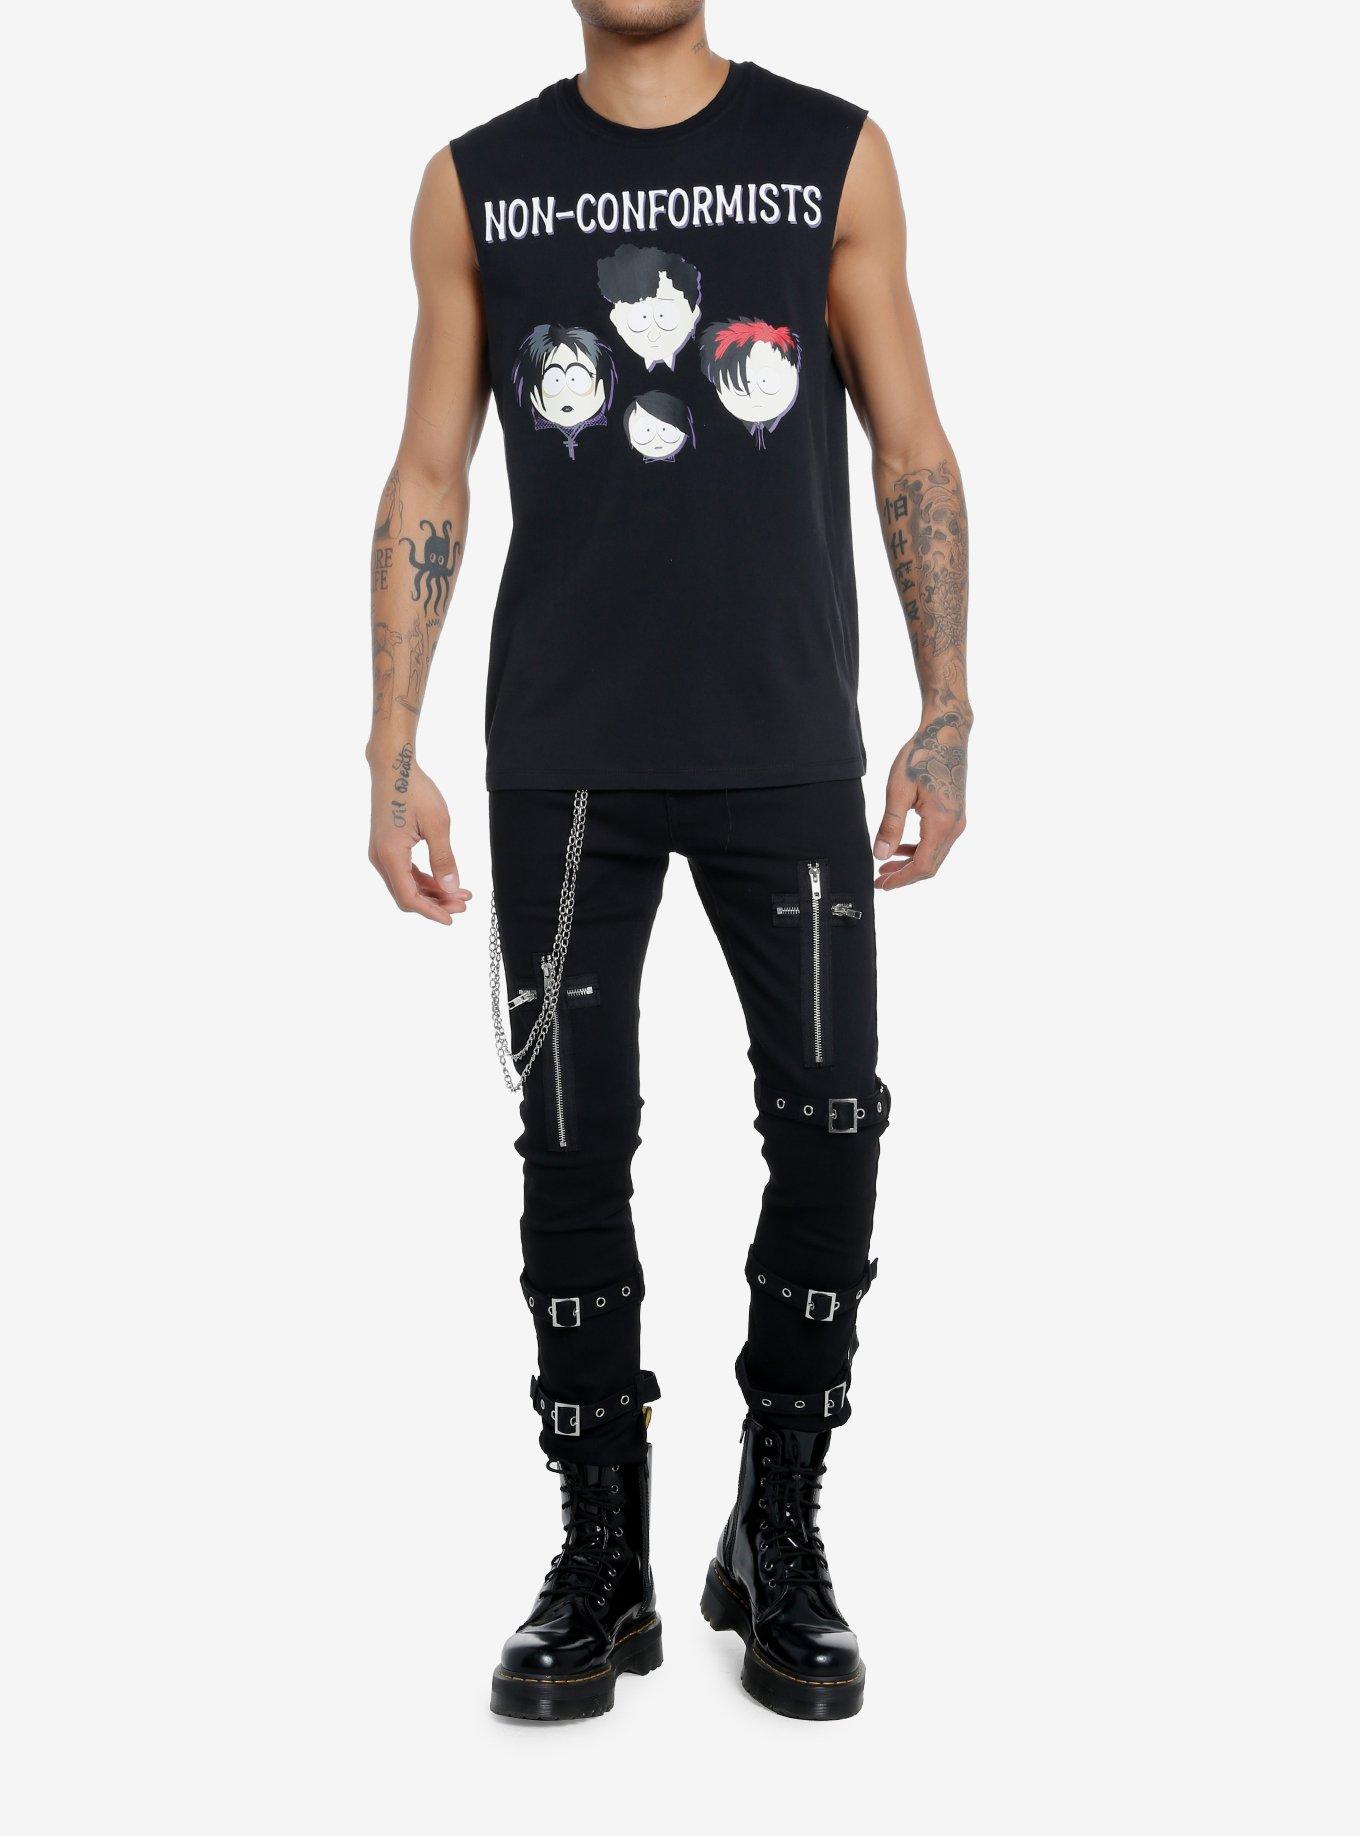 South Park Goth Kids Muscle Tank Top